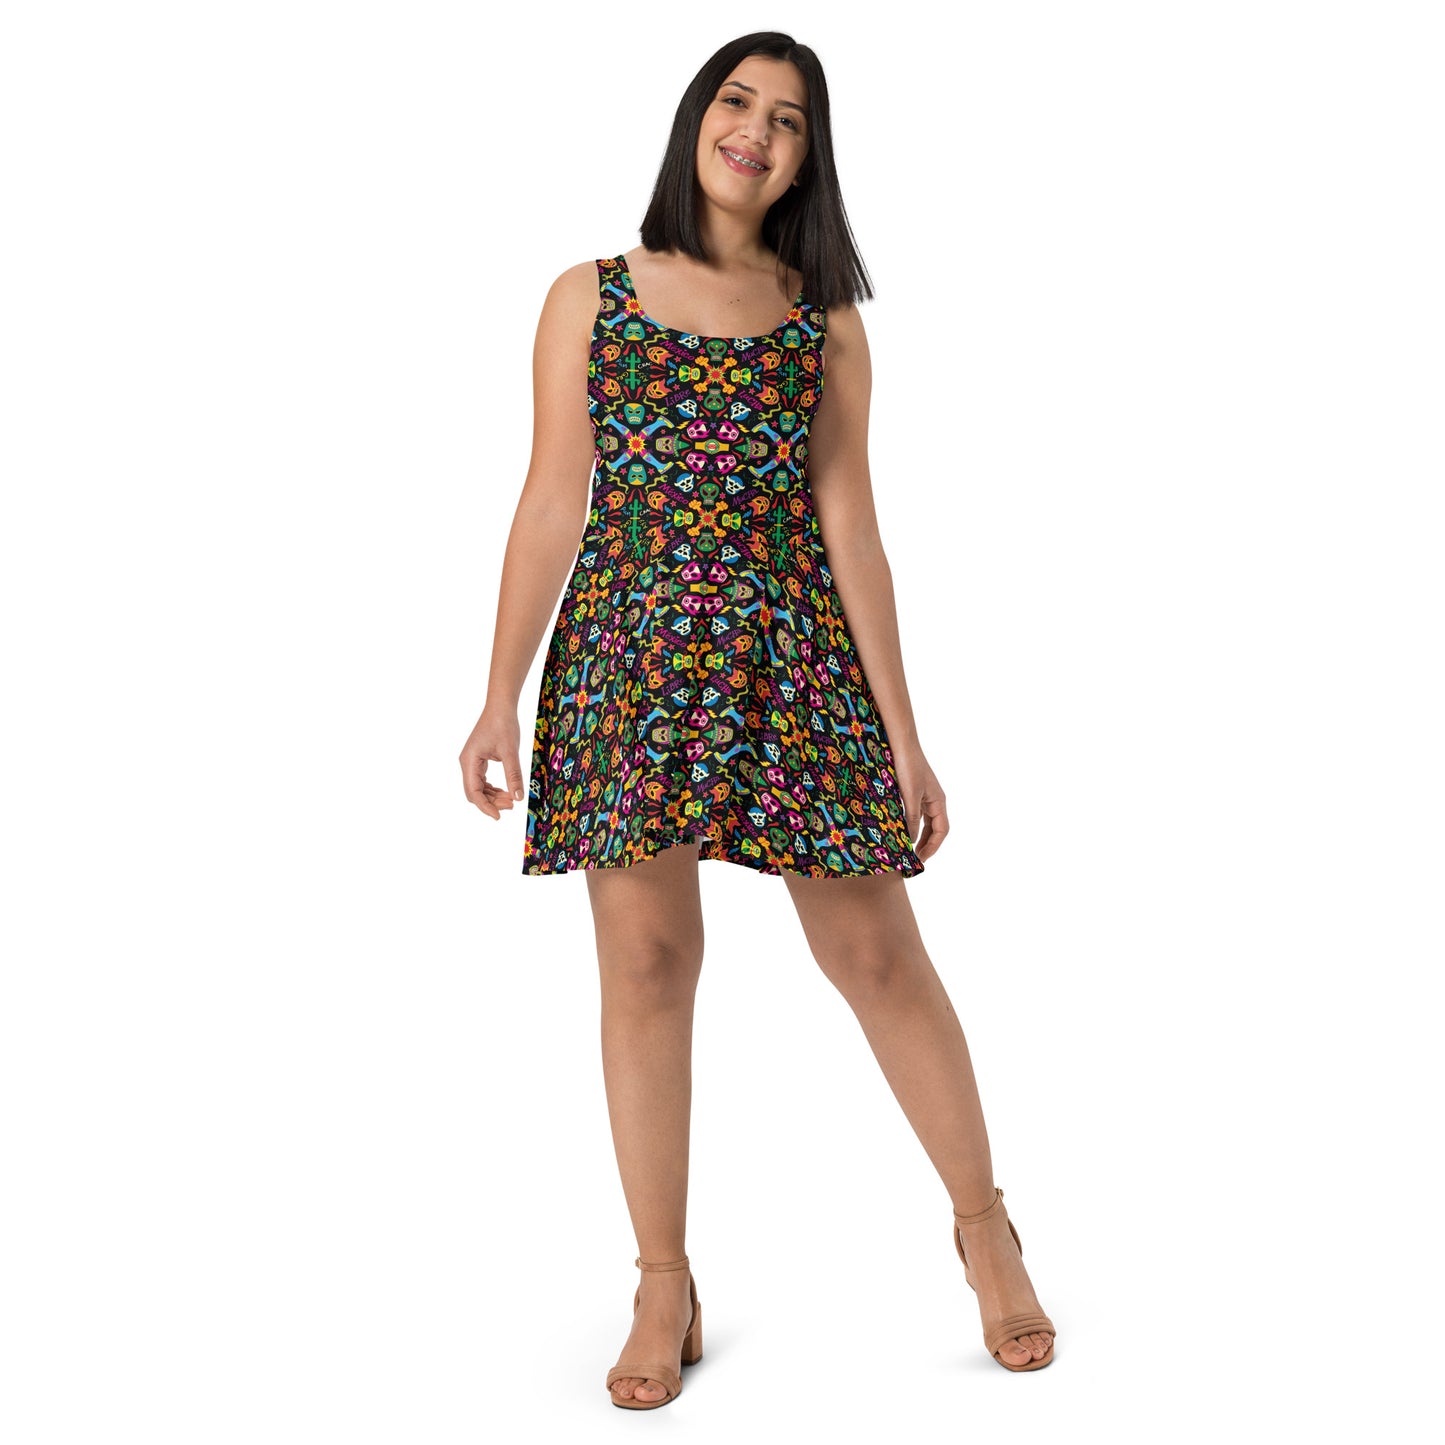 Mexican wrestling colorful party Skater Dress. Overview